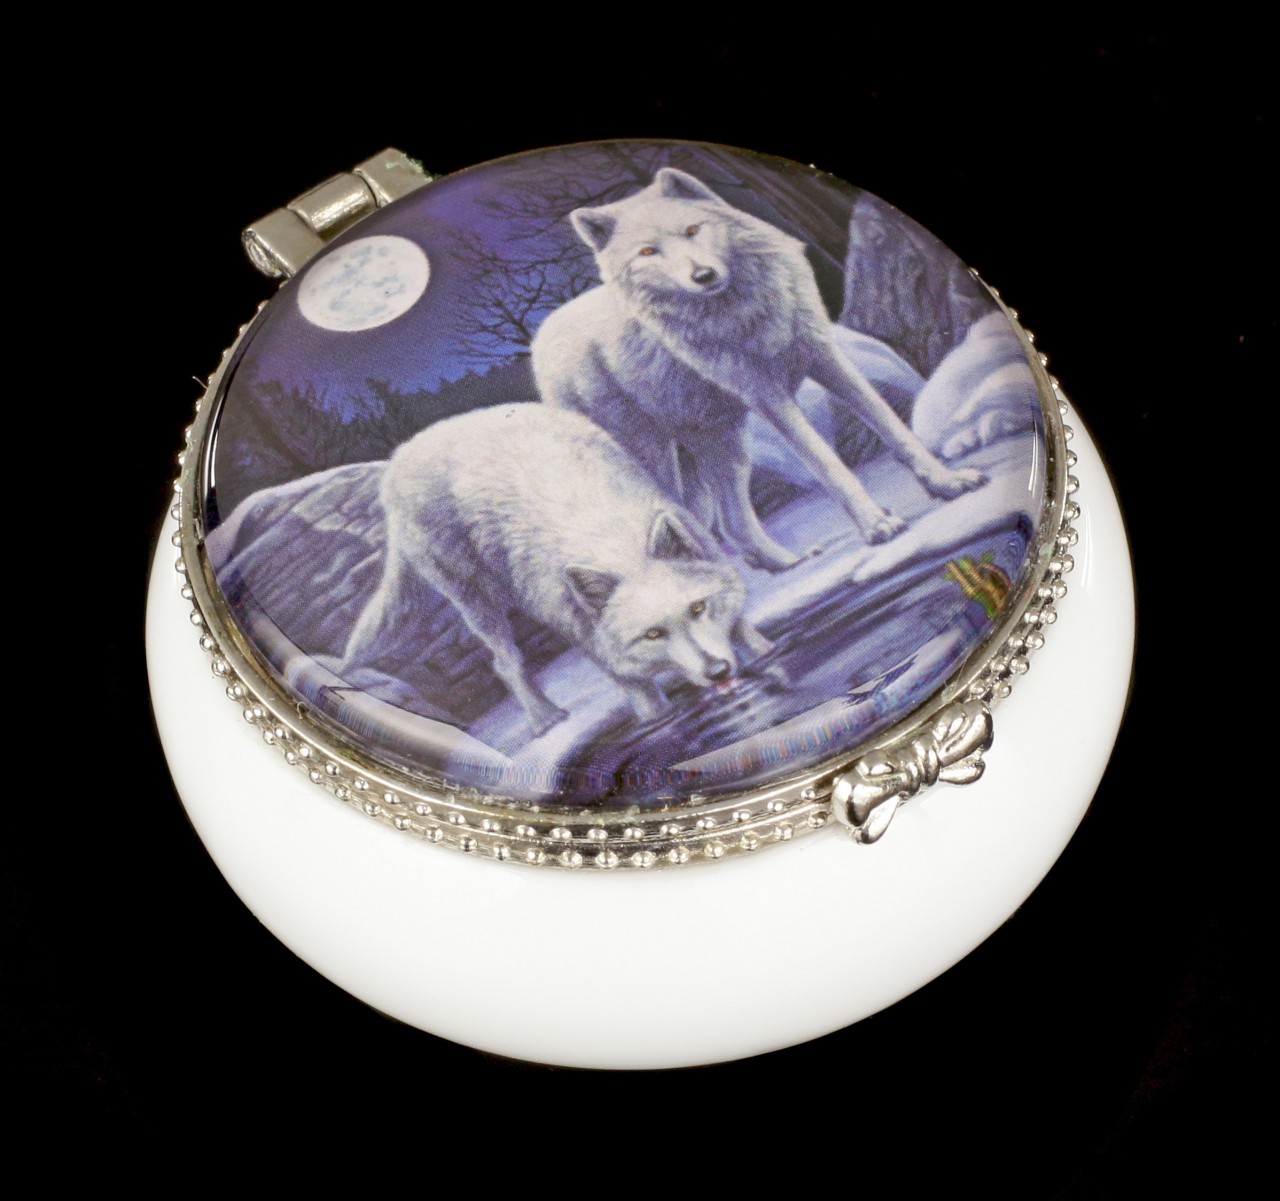 Trinket Box with Wolves - Warriors of Winter